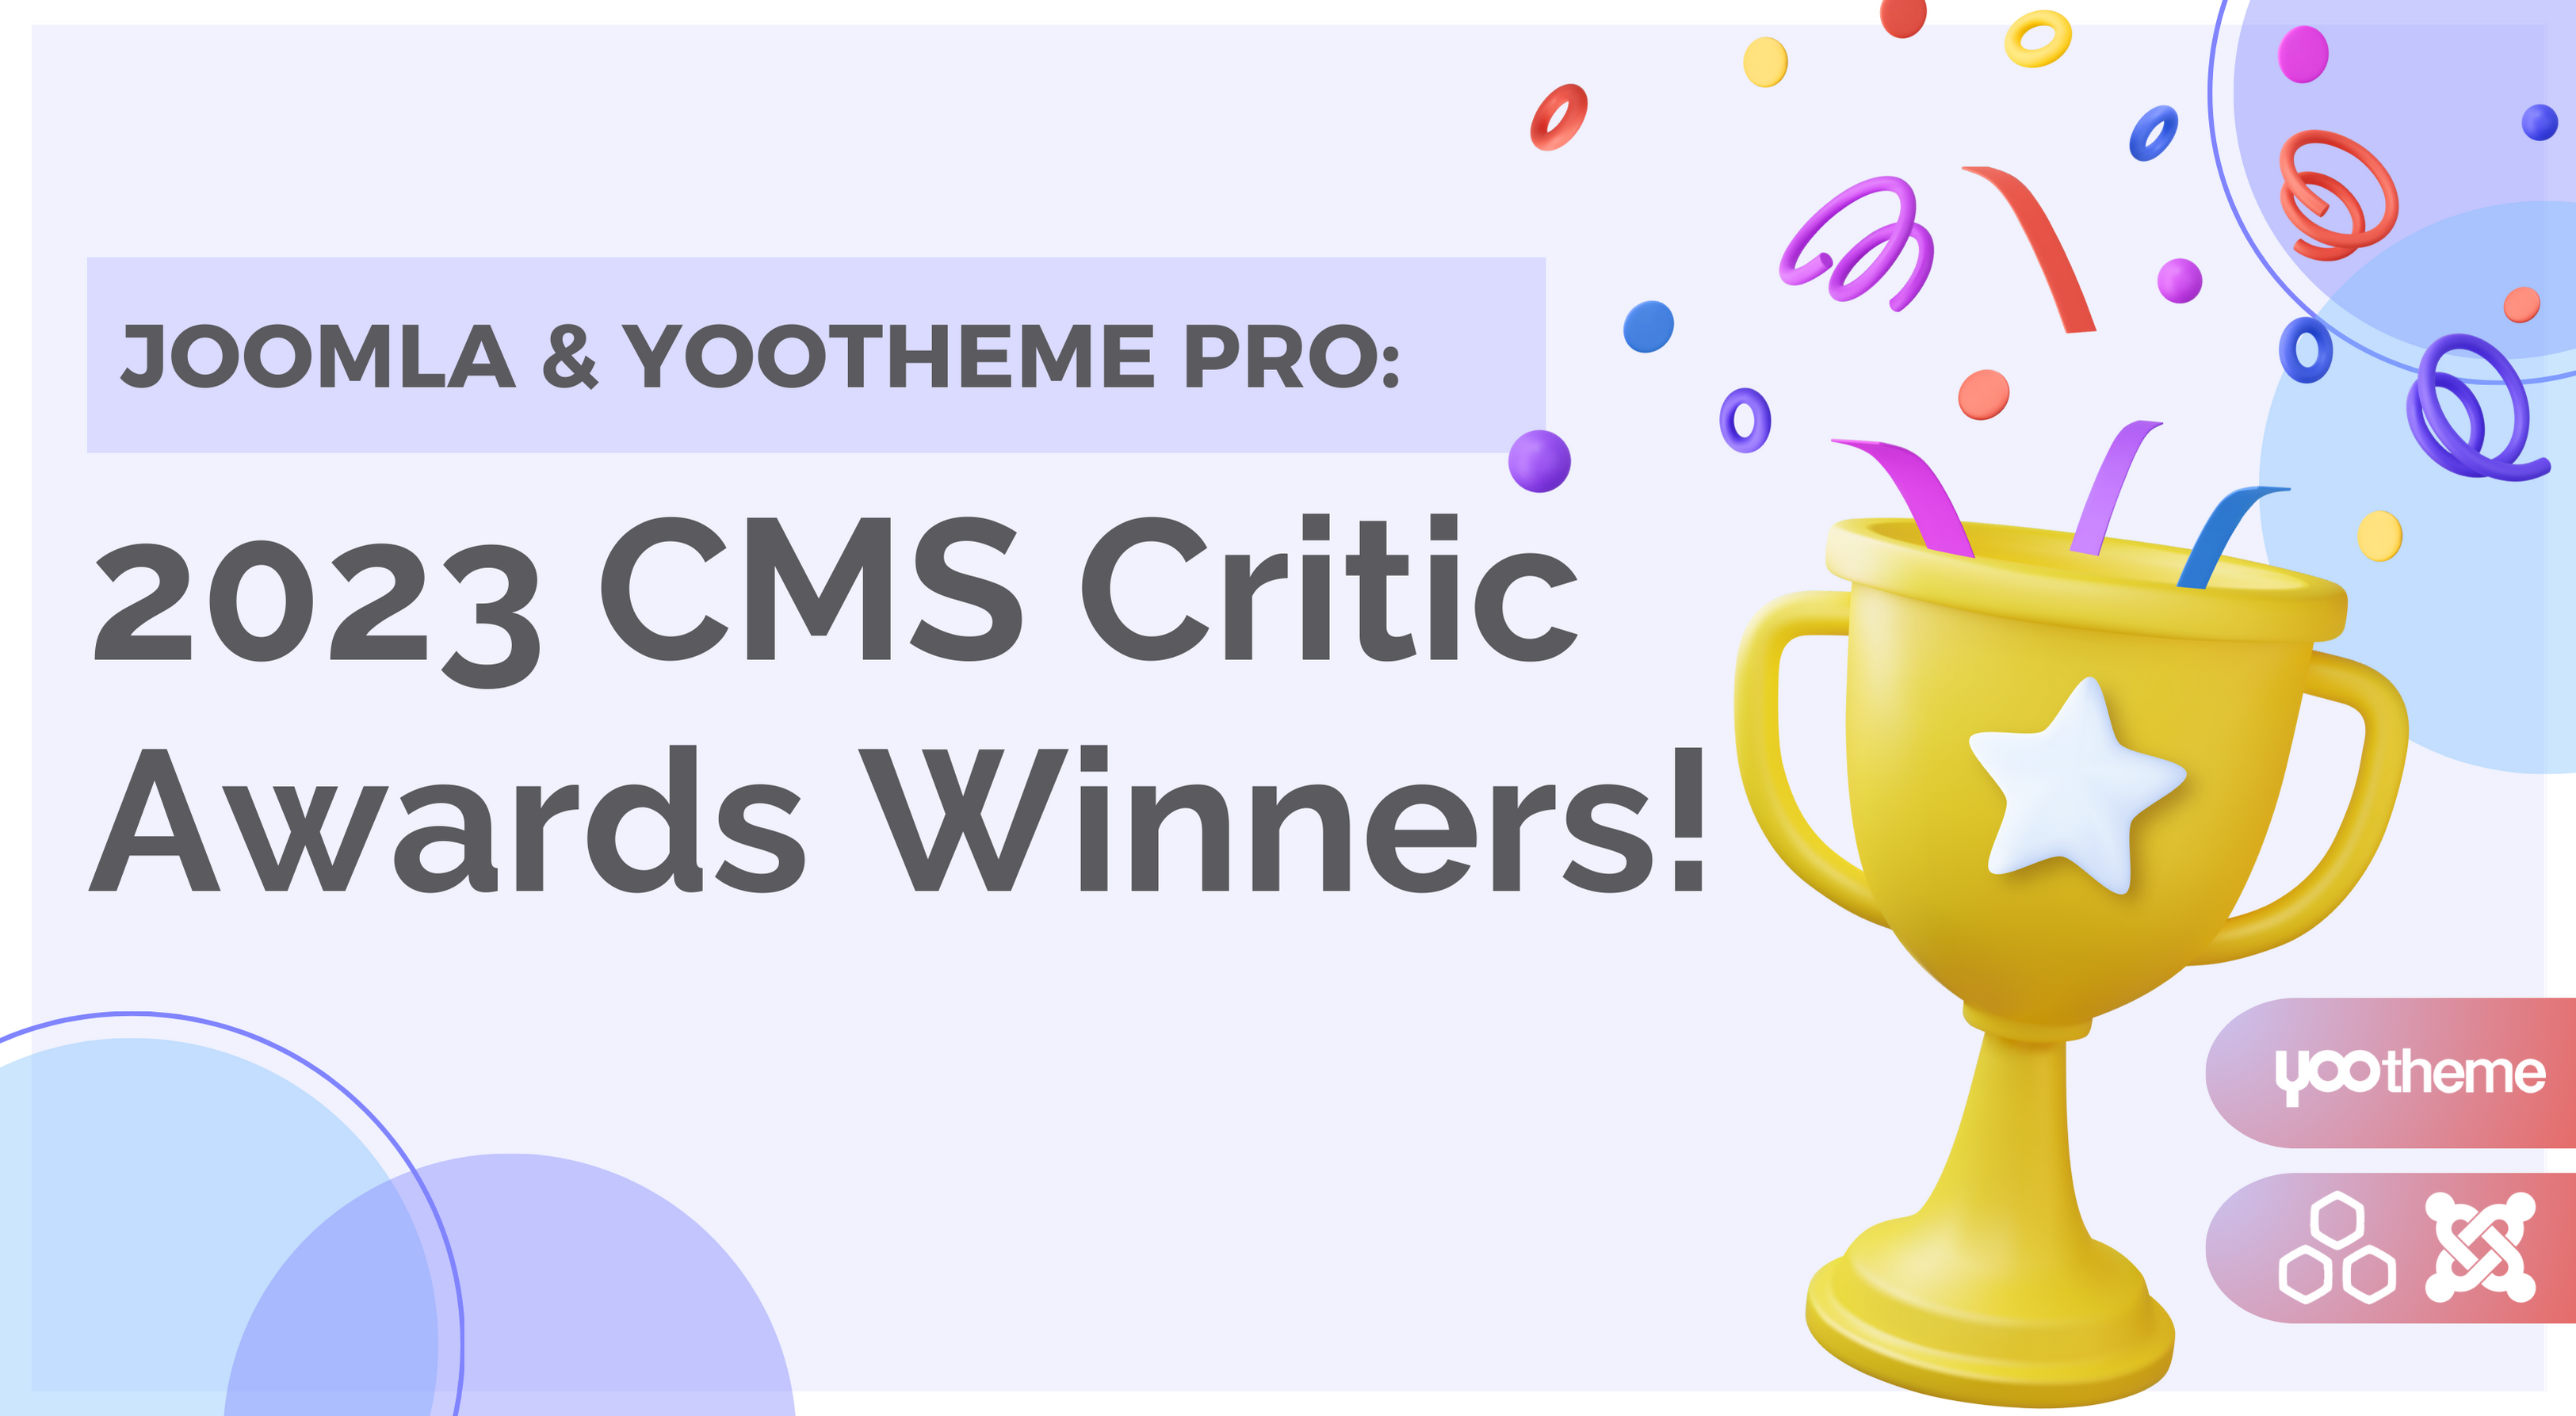 Joomla and YOOtheme are the Winners of the 2023 CMS Critic People’s Choice Awards!